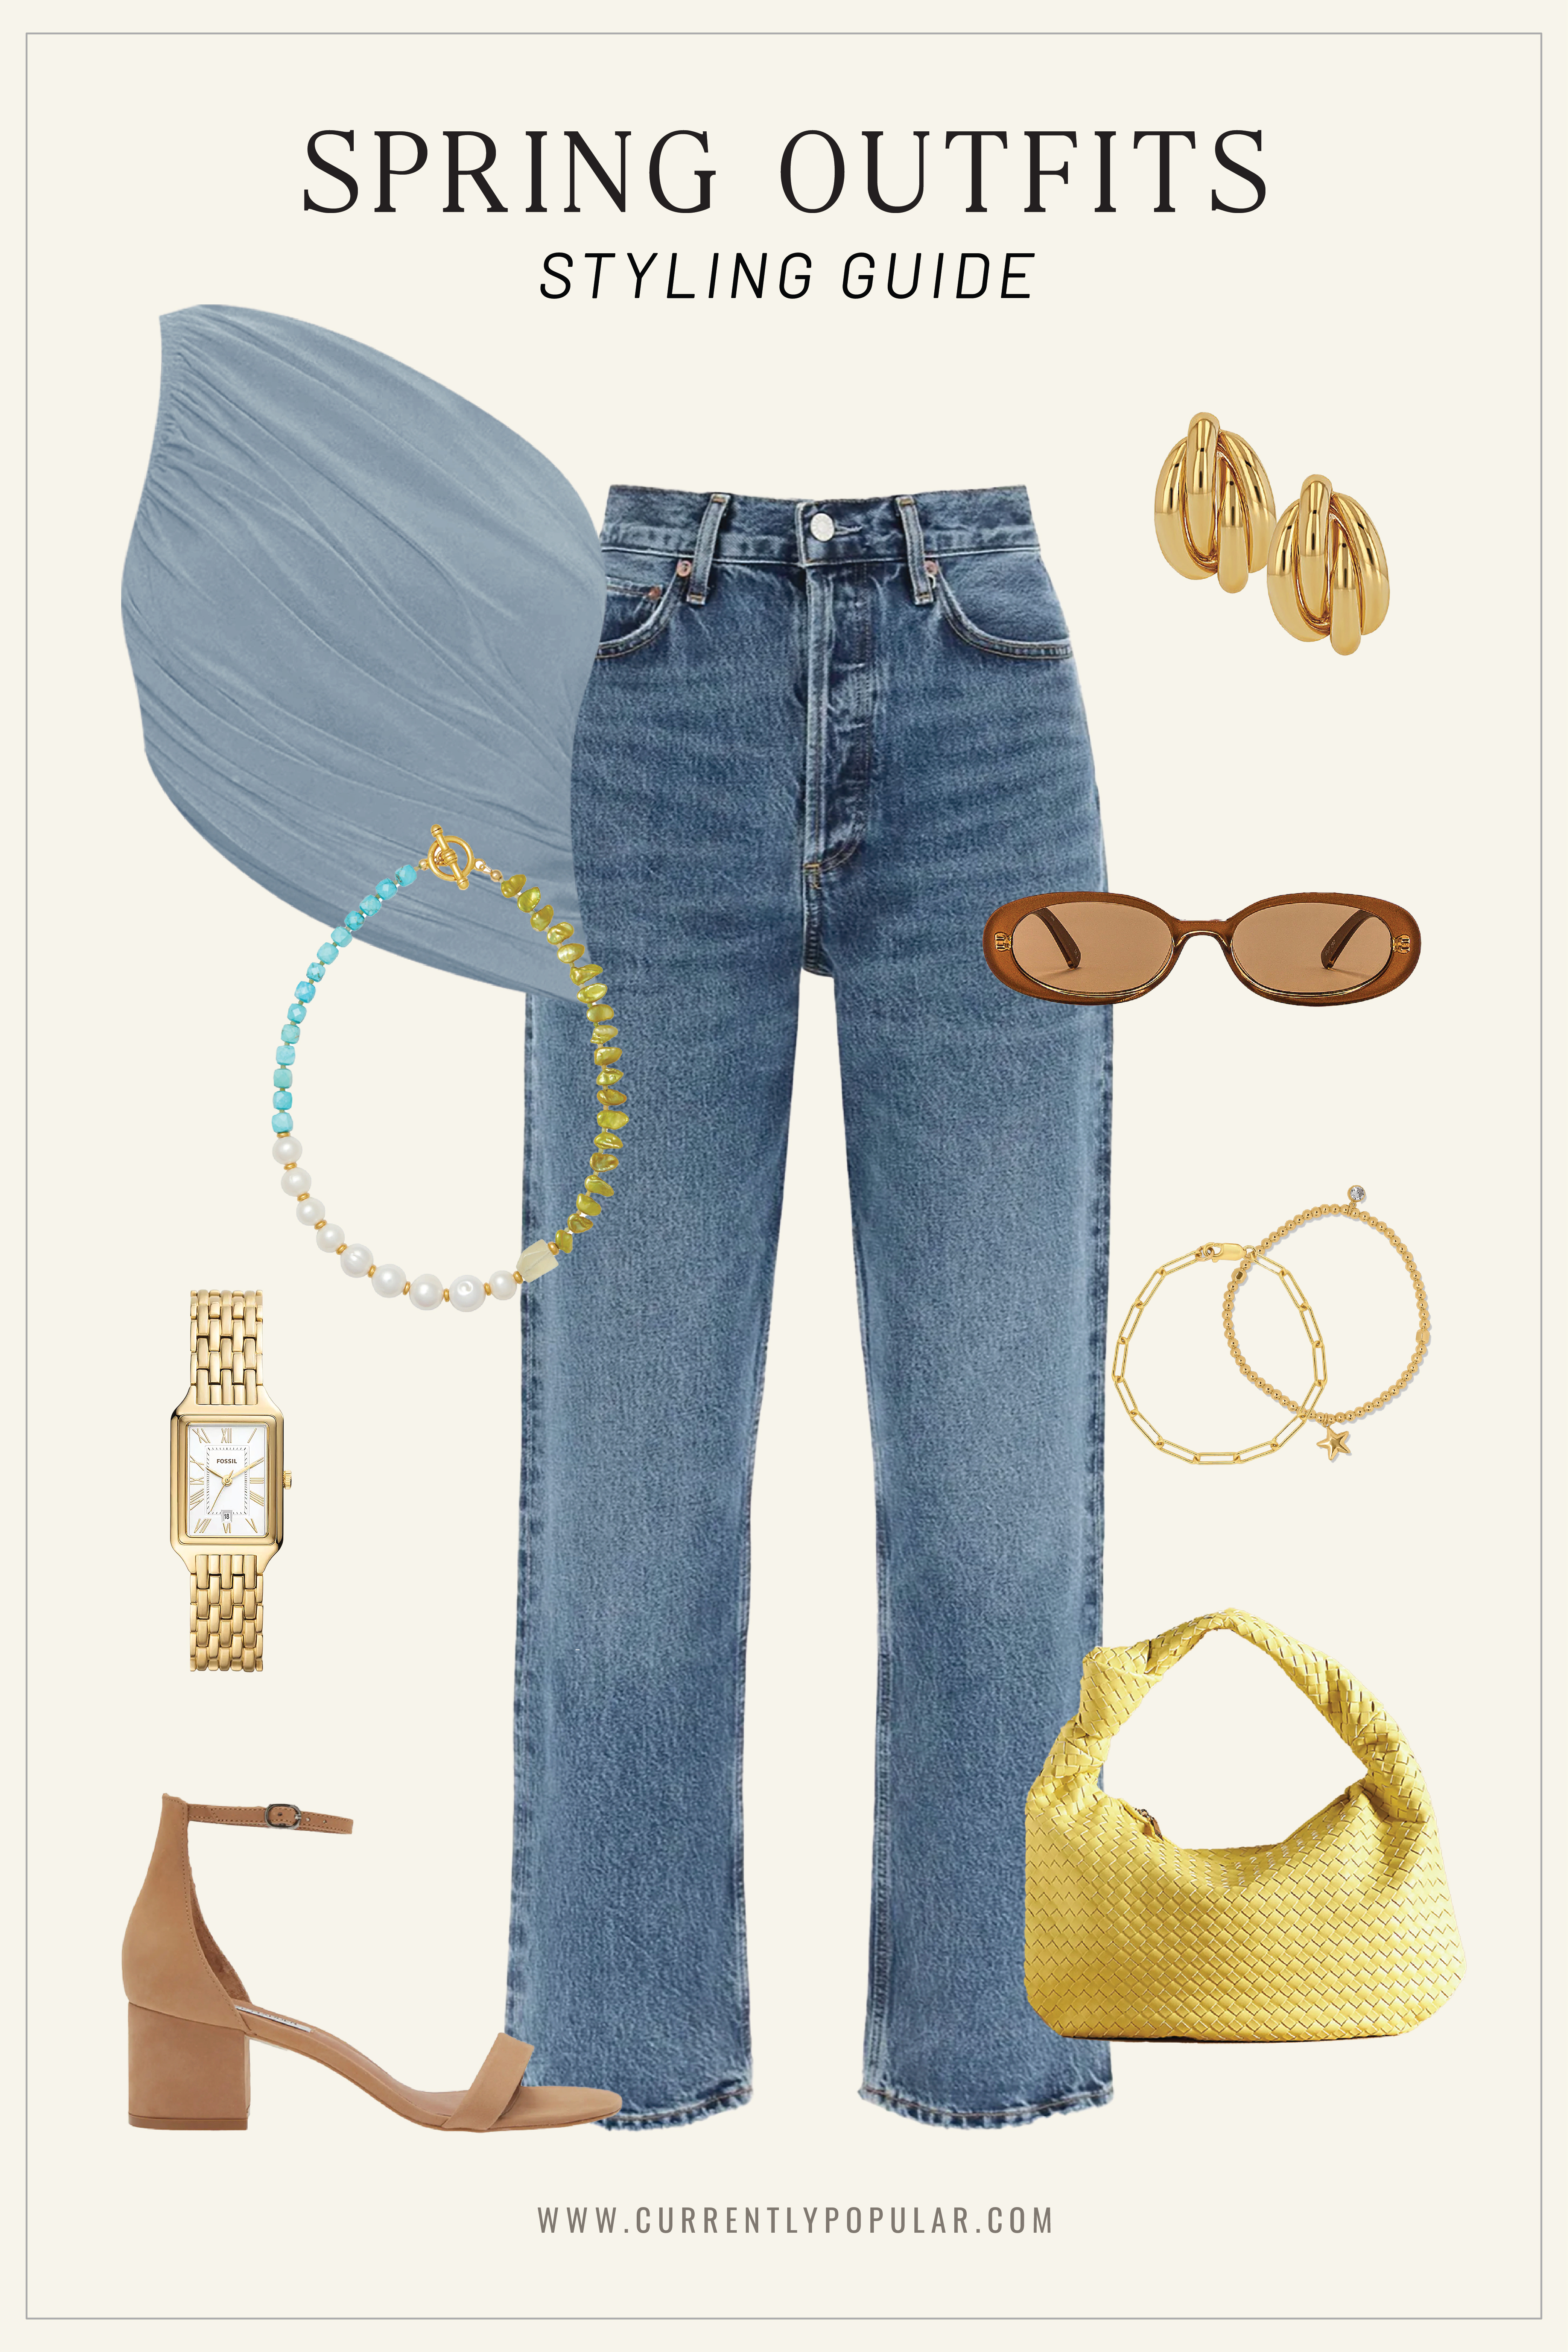 Casual Spring Outfit: Flared Jeans, Block Heels, Blue Top, Gold Accessories.